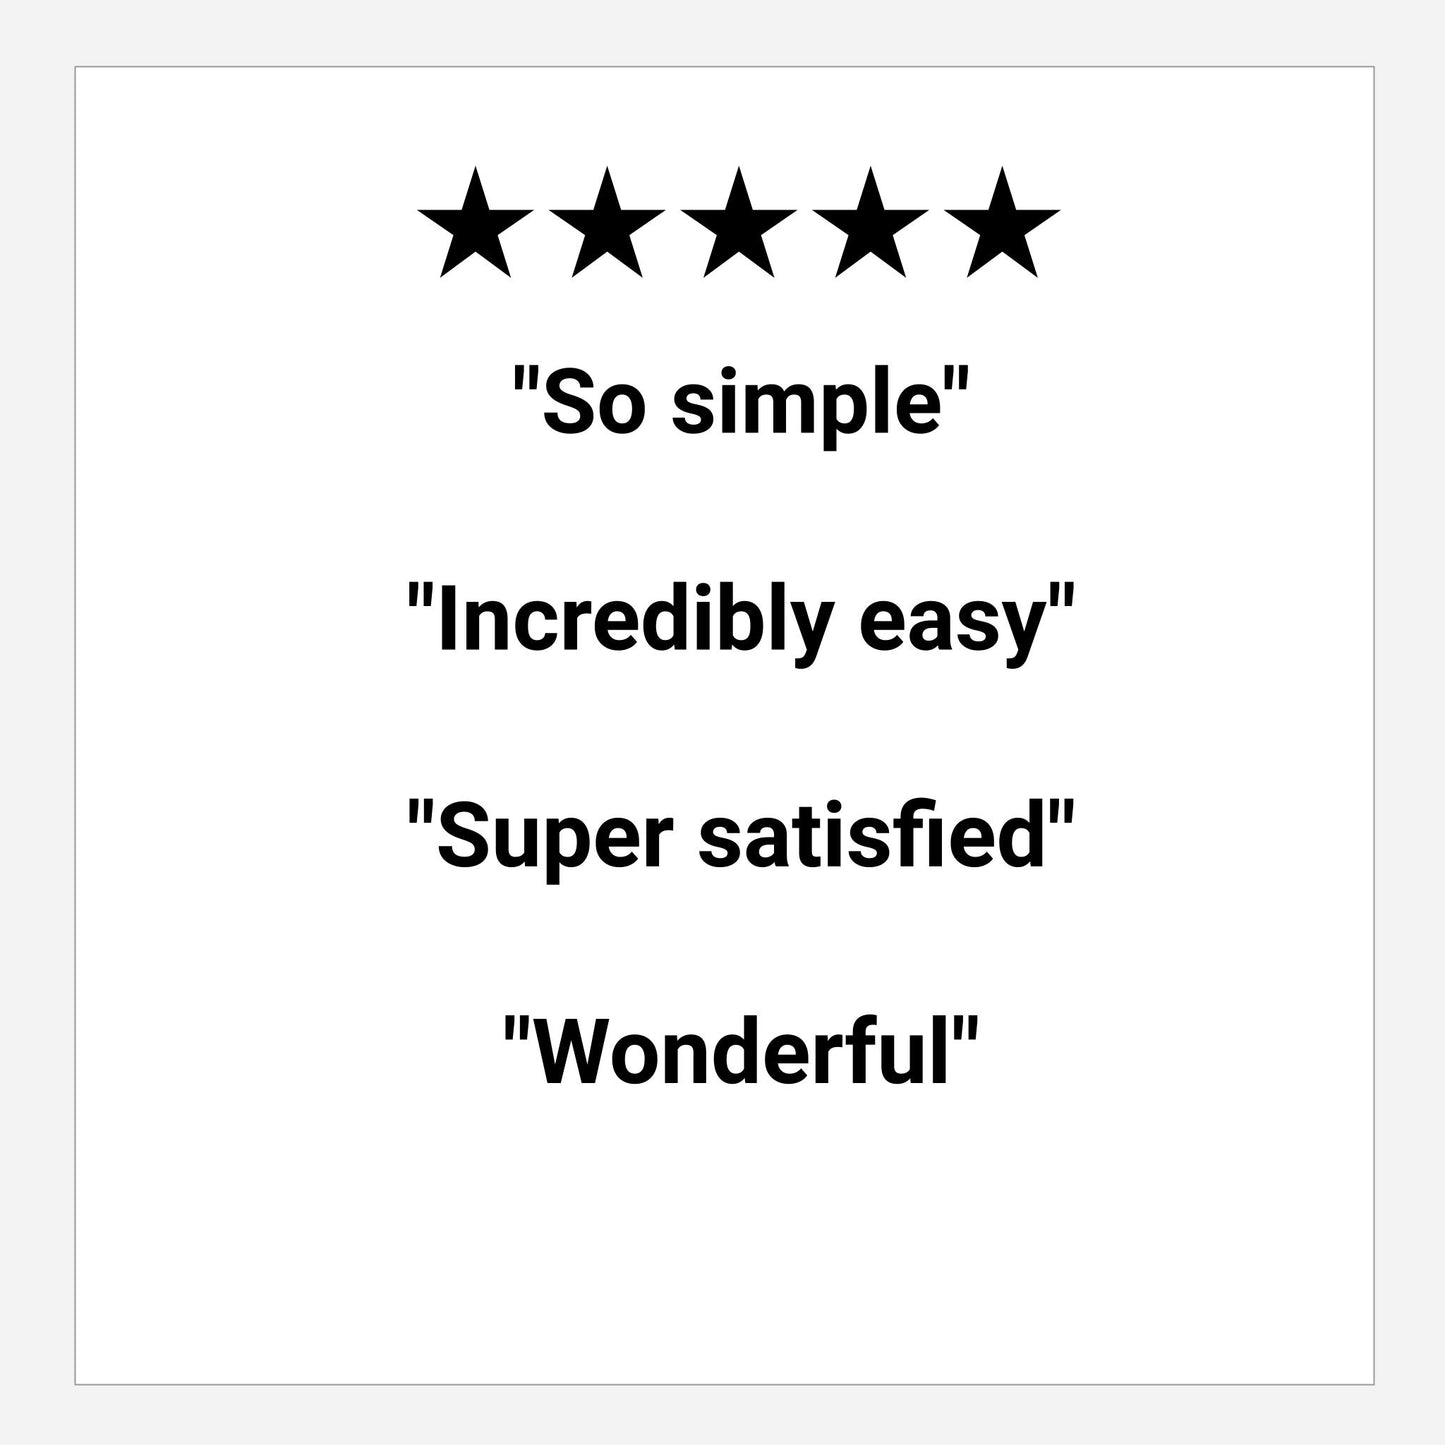 Call-outs from 2xEDGE staple 5-star reviews including "So simple", "Incredibly easy", "Super satisfied", "Wonderful".